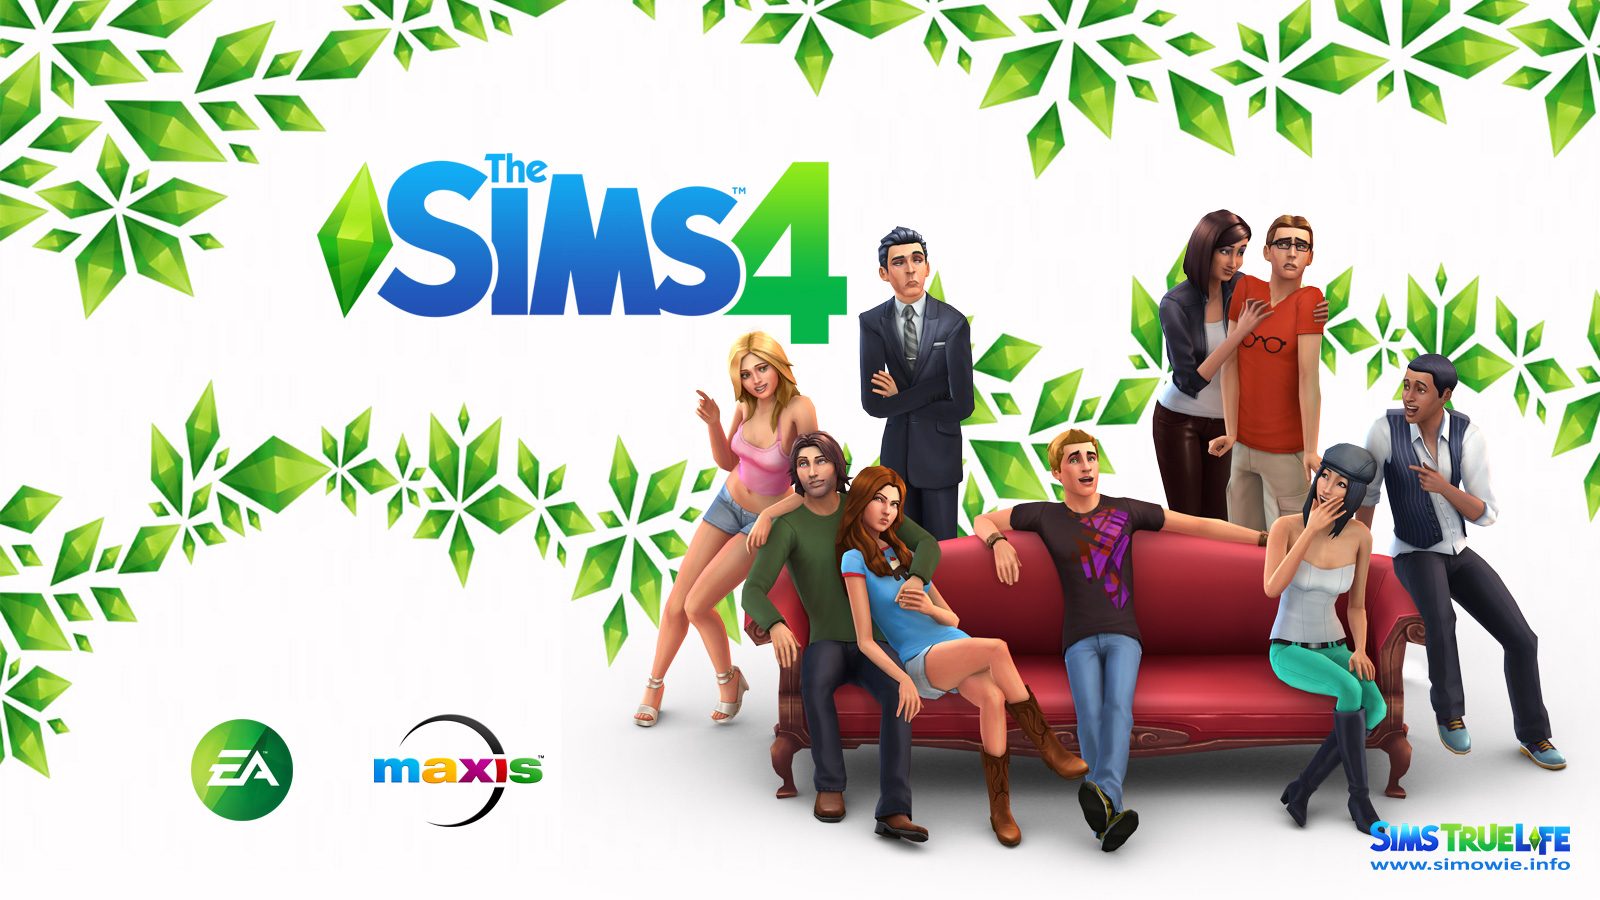 The Sims Wallpaper Image Picture